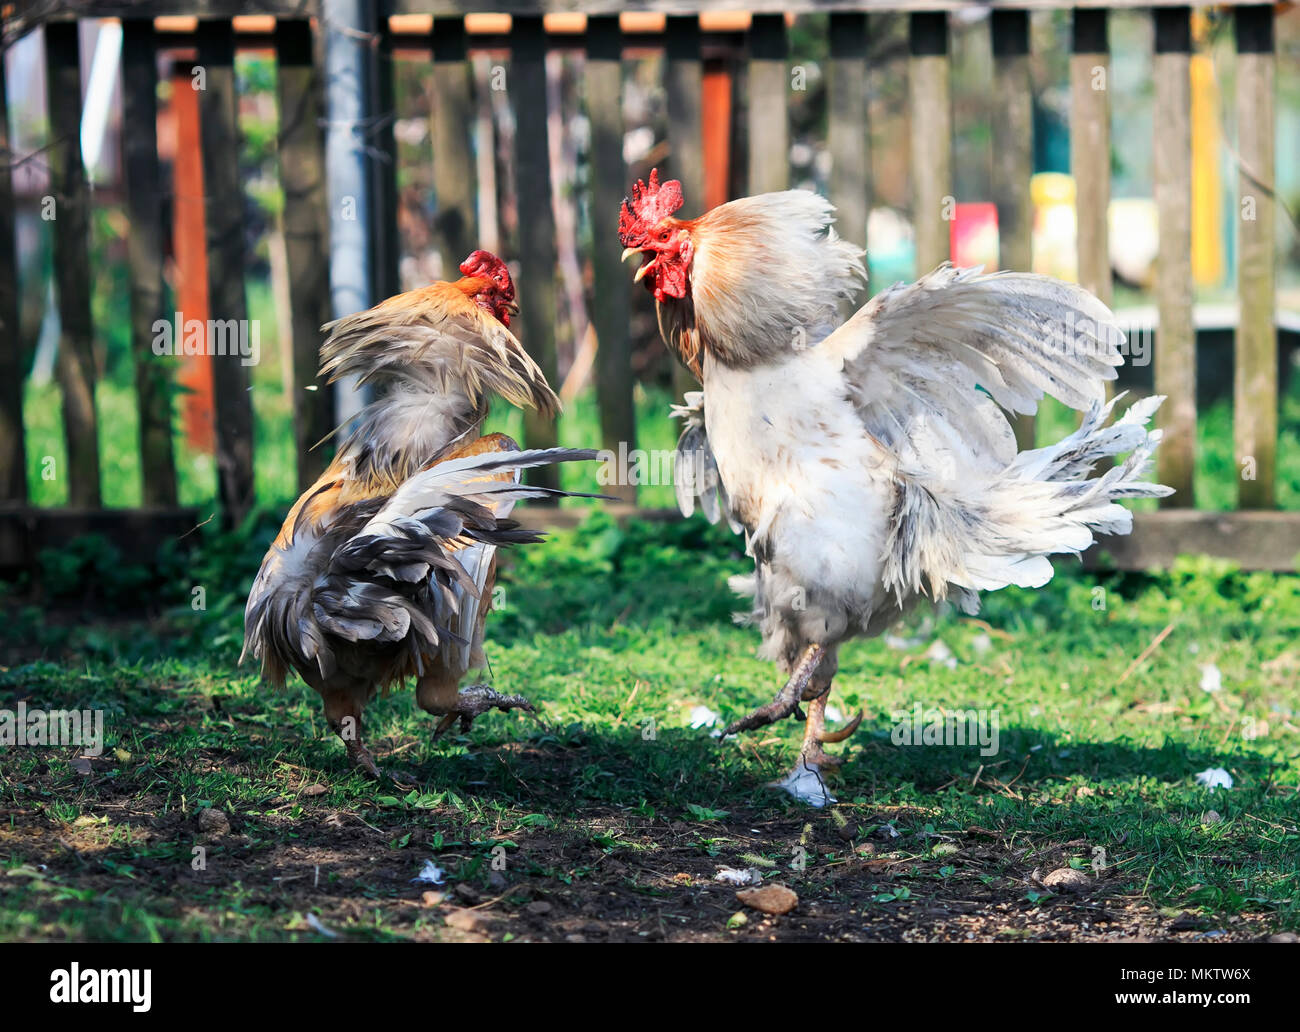 two brisk aggressive rooster fight in the backyard farm funny wings and feathers Stock Photo